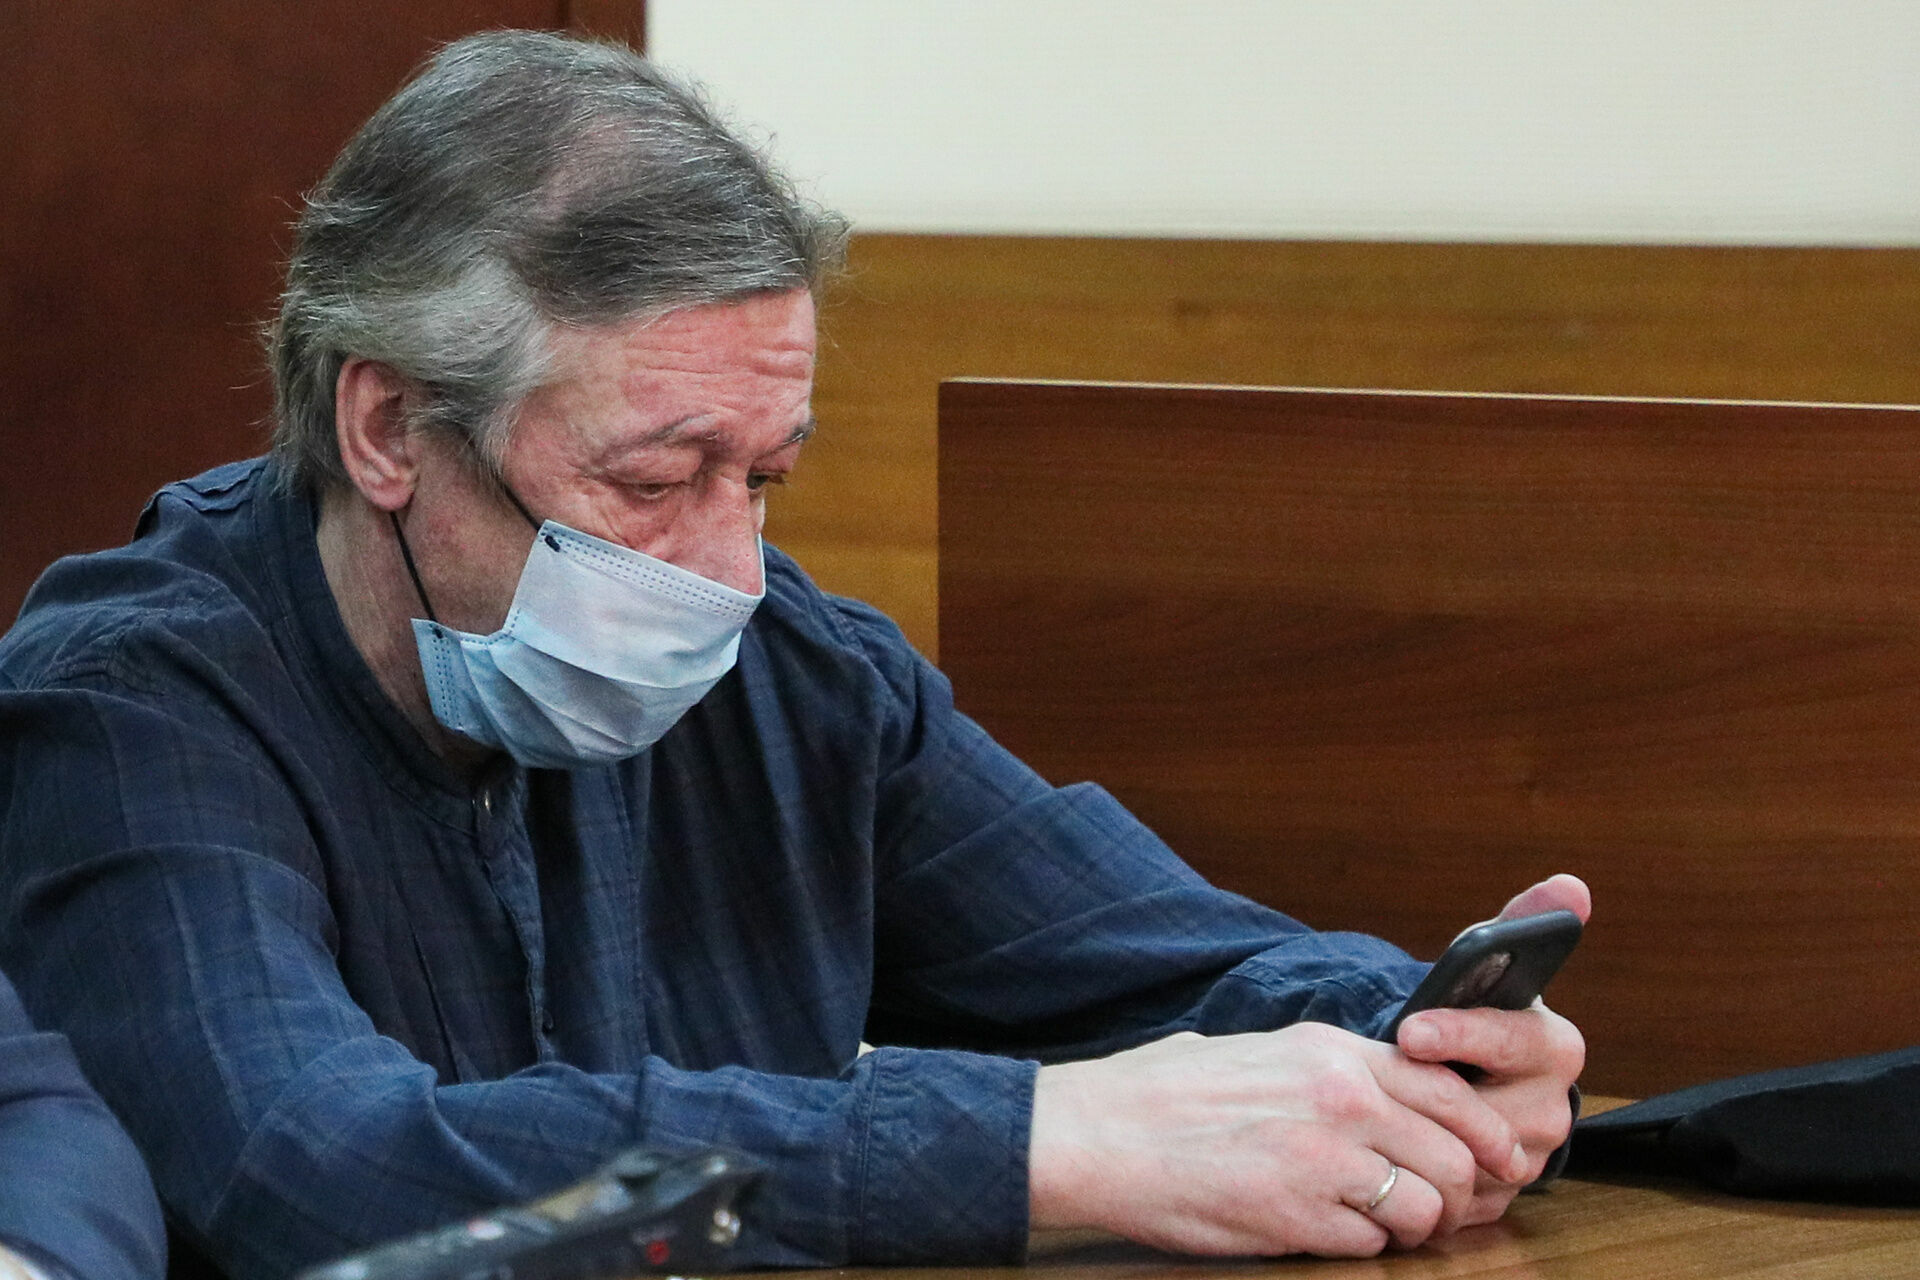 Drunk amnesia: Yefremov pleaded not guilty in the road accident, because "he doesn't remember anything"